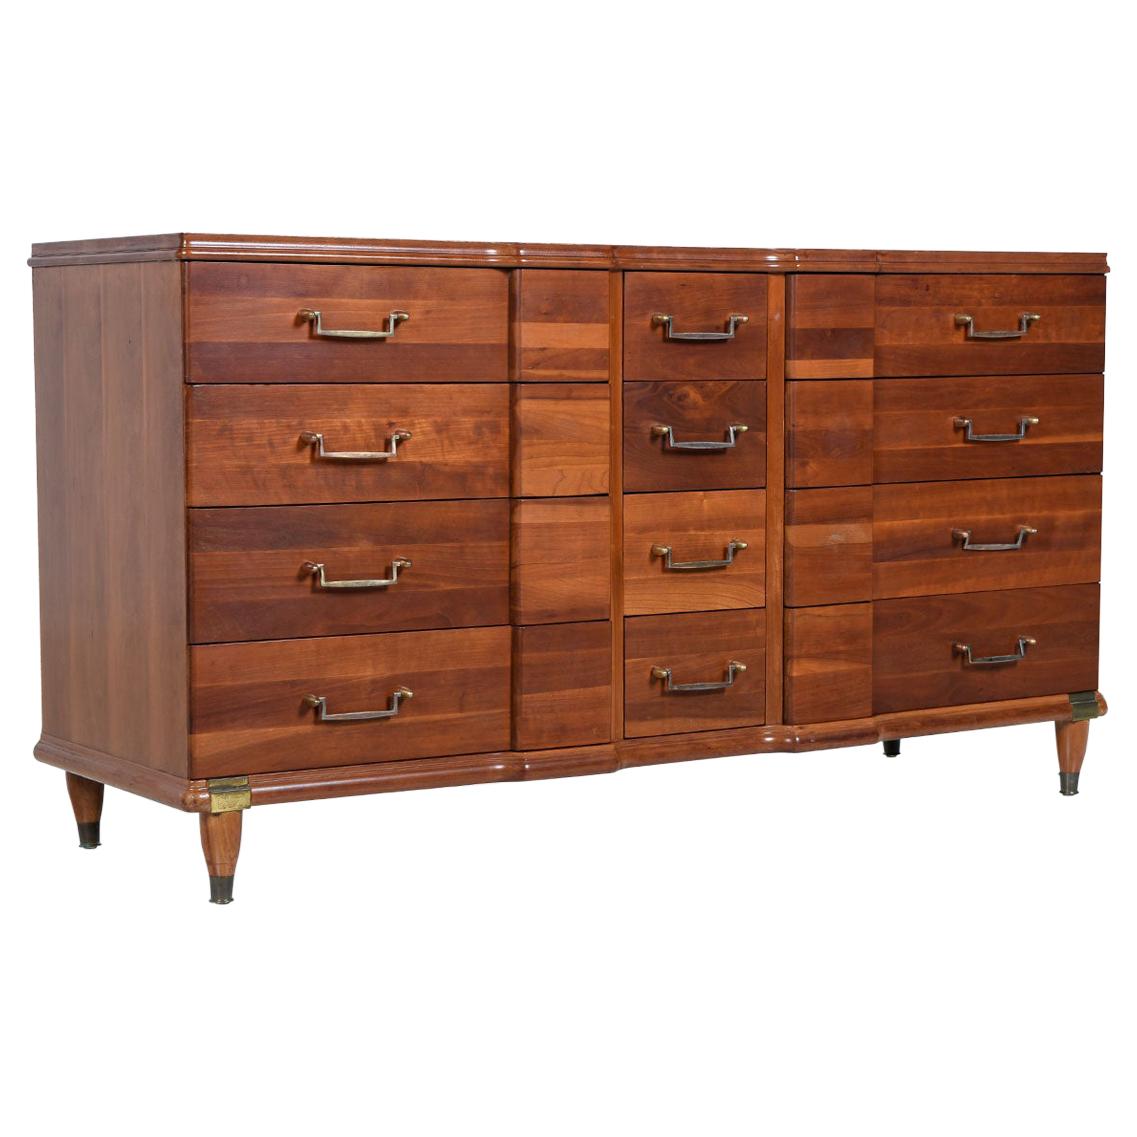 Made by Hickory Manufacturing Furniture Company, this cherrywood dresser is an interesting hybrid of many styles. The Machine Age pulls, Campaign brass accents and Art Deco bump-outs make it tough to categorize the exact look. Regardless, it’s a